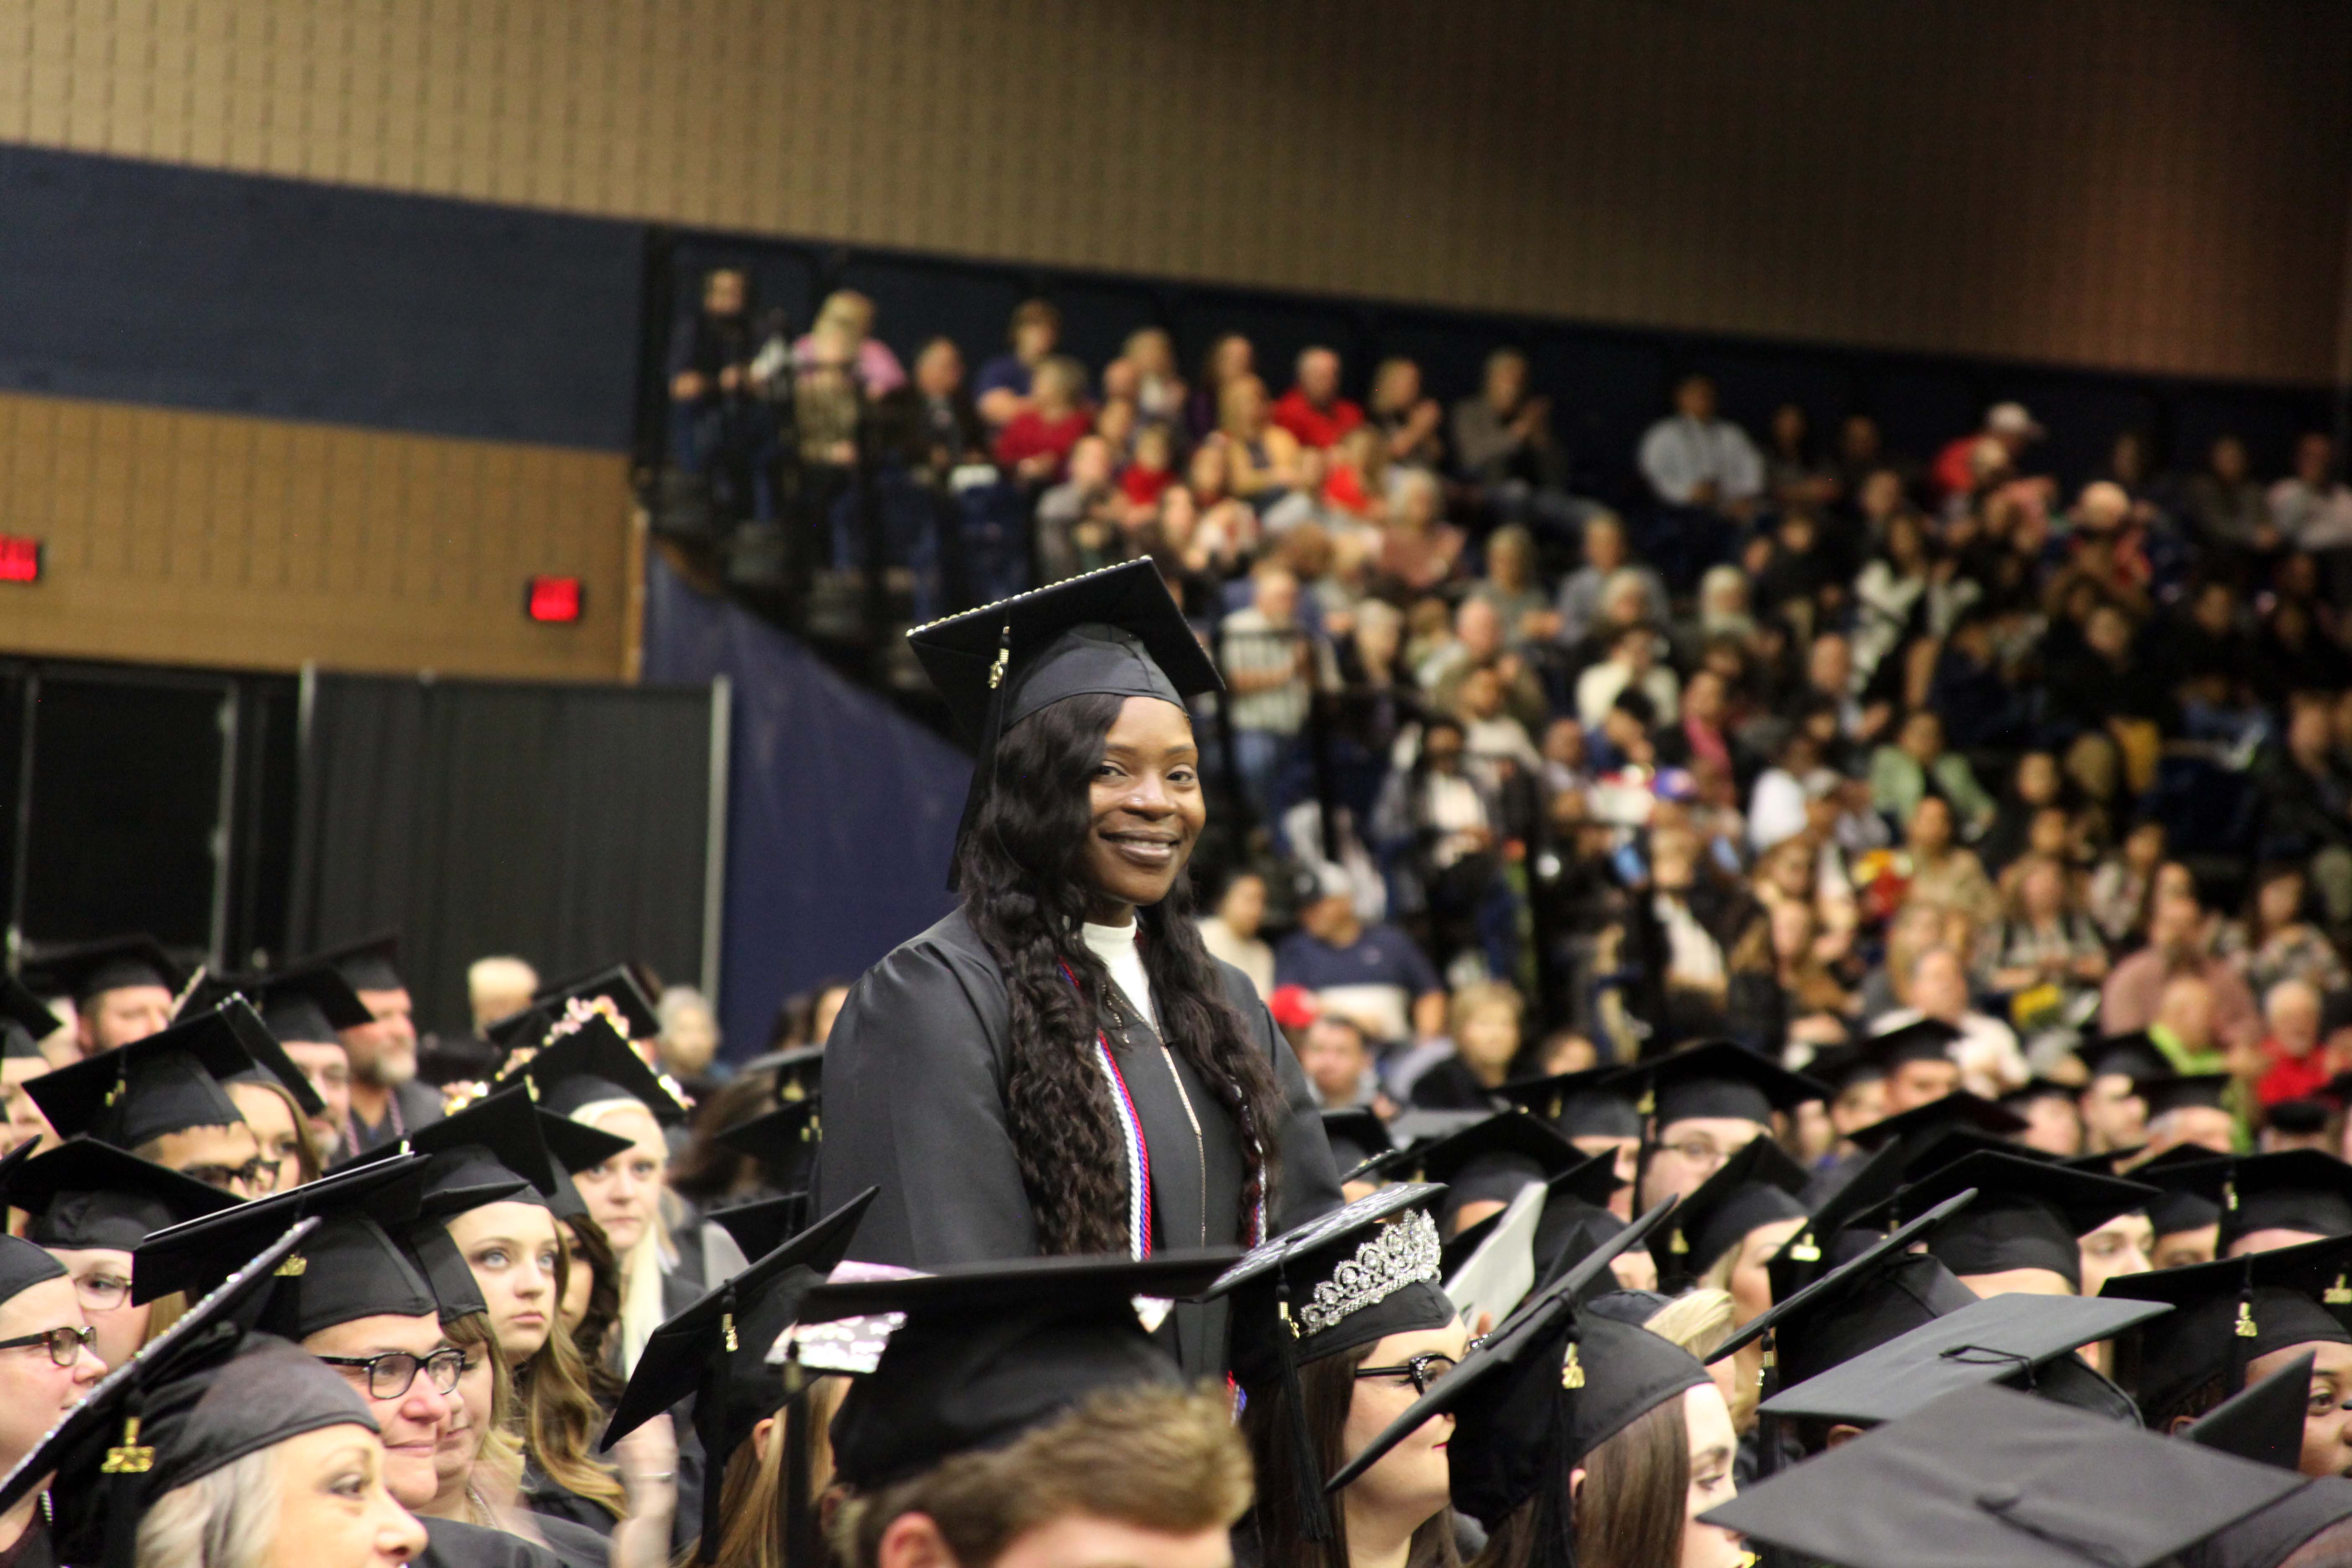 GNTC Student Government Association (SGA) President Jaweah Hamilton stands during the Fall 2019 Commencement Ceremony at the Dalton Convention Center. Hamilton was being recognized for her service in SGA and received an Associate of Applied Science Degree in Early Childhood Care and Education.